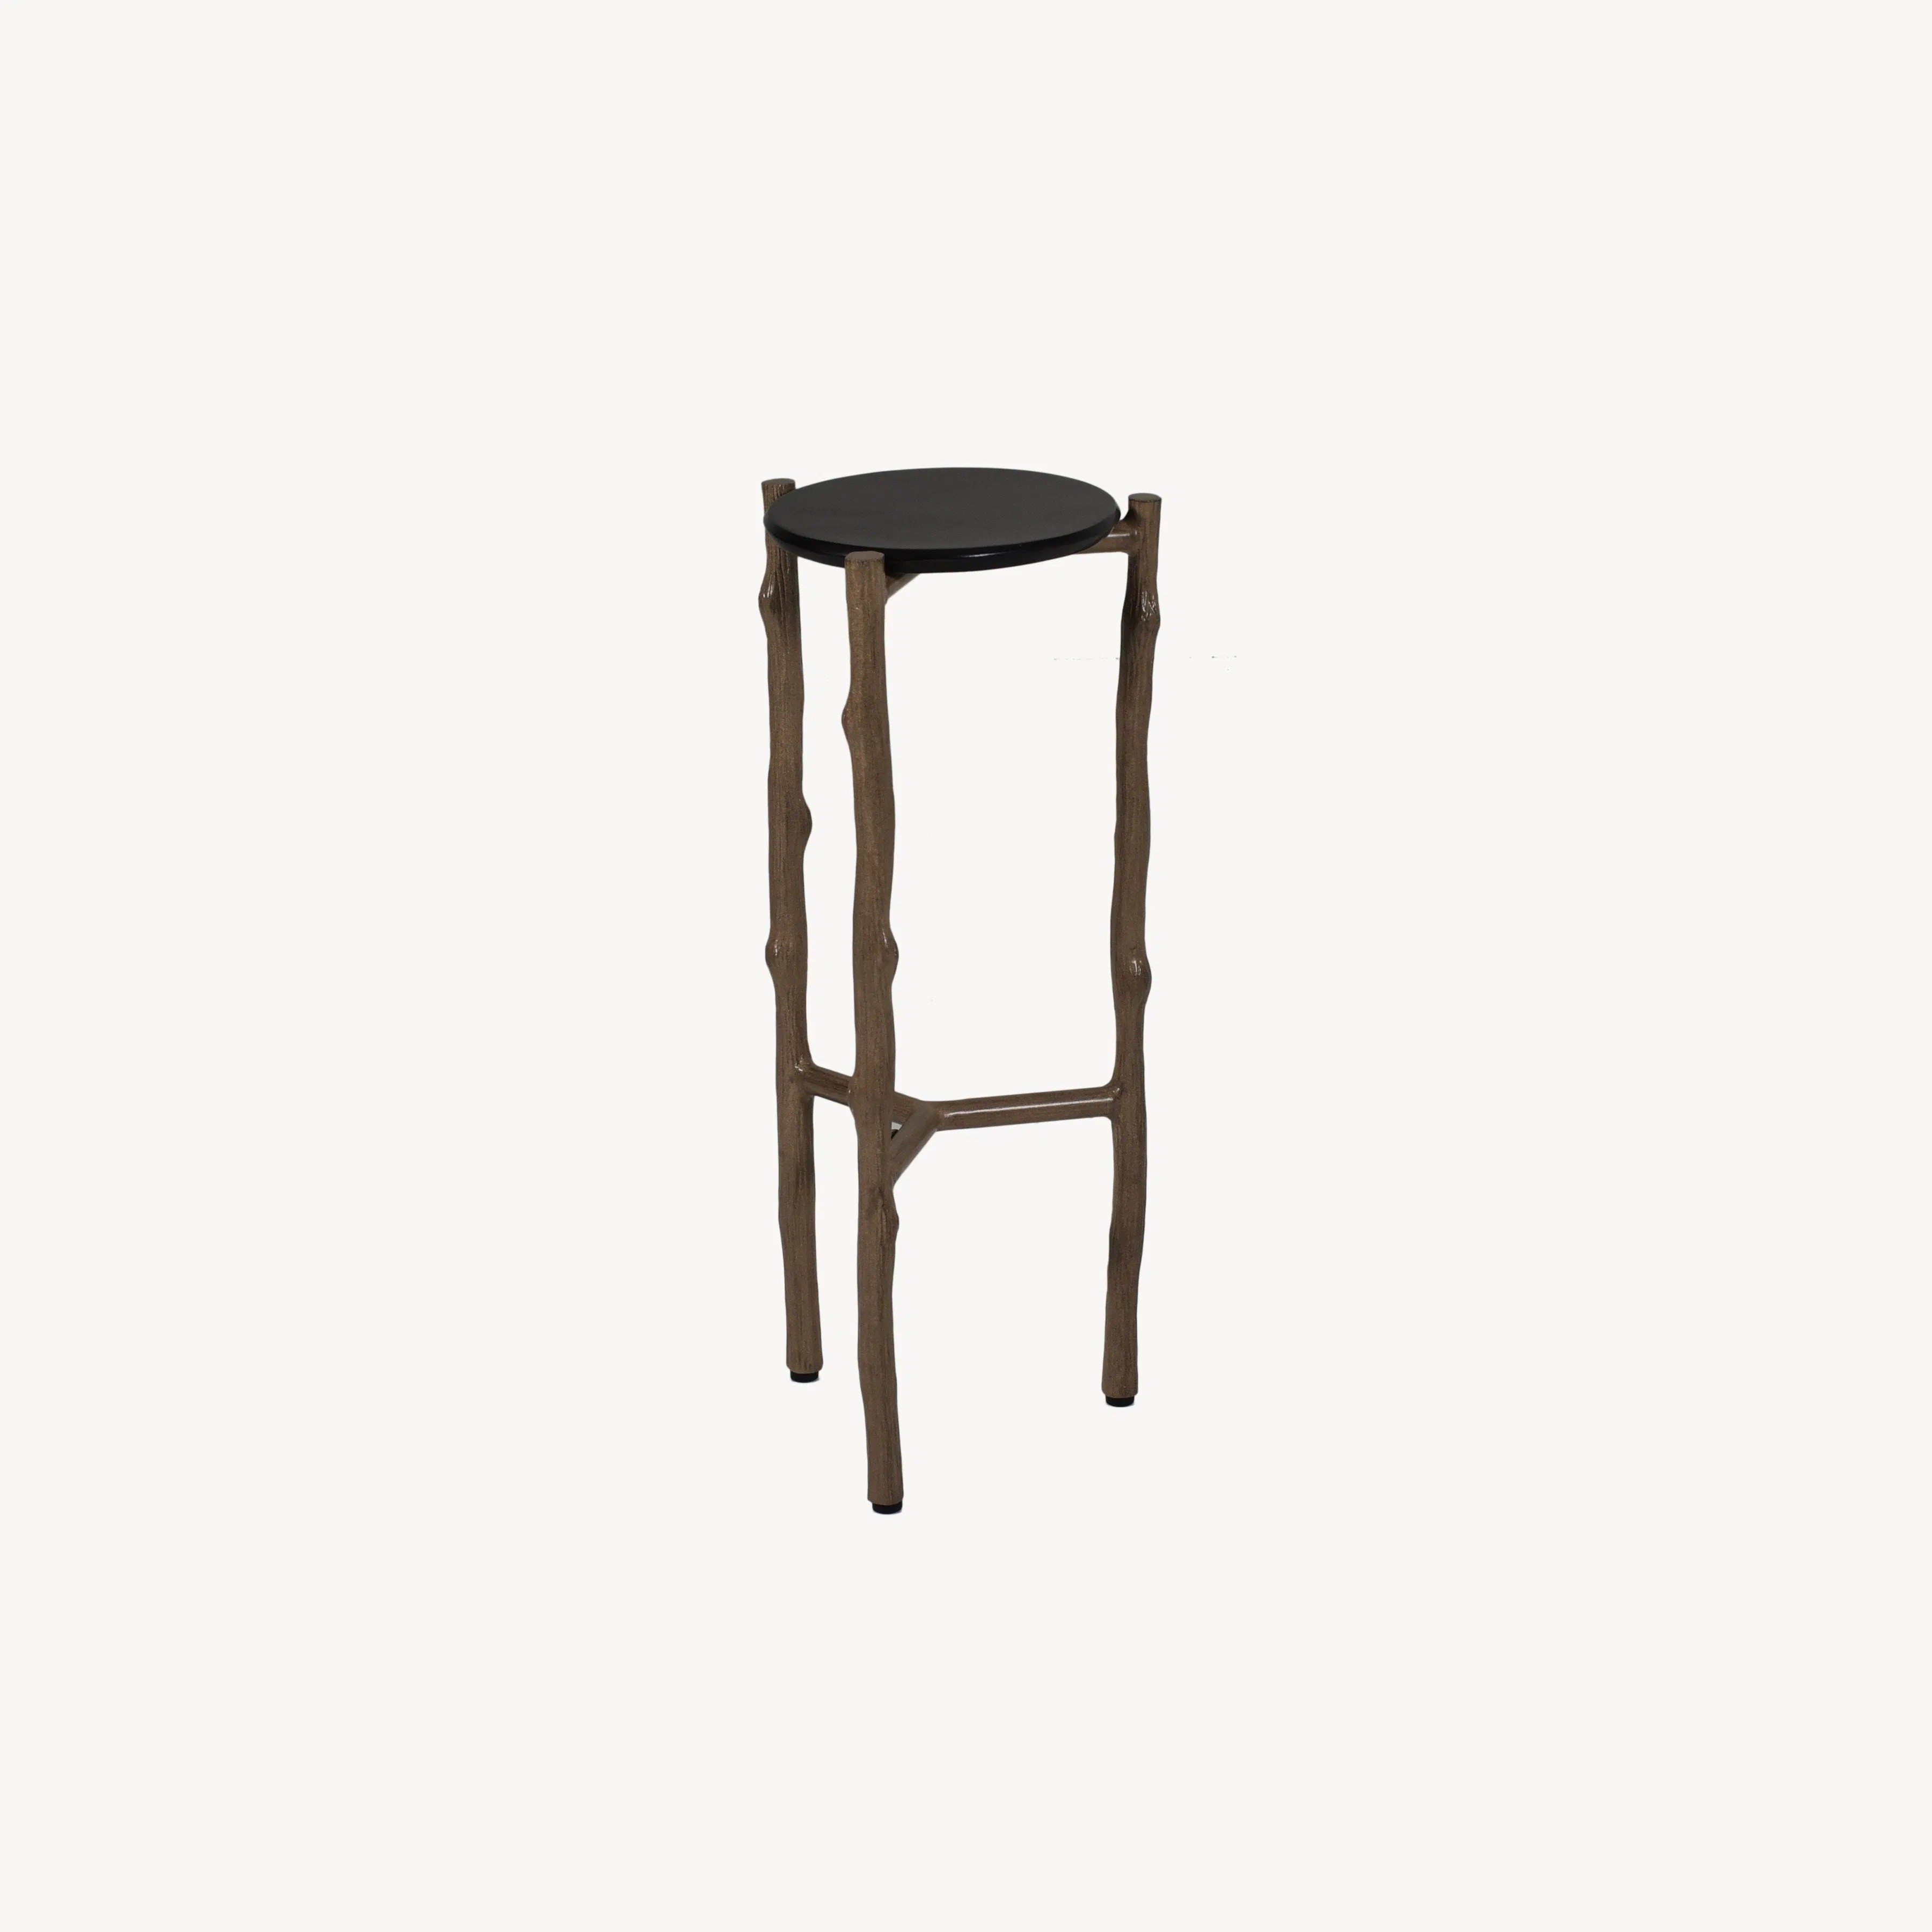 TWIG 12″ ROUND DRINK TABLE
B4CO10
SPEC SHEET
